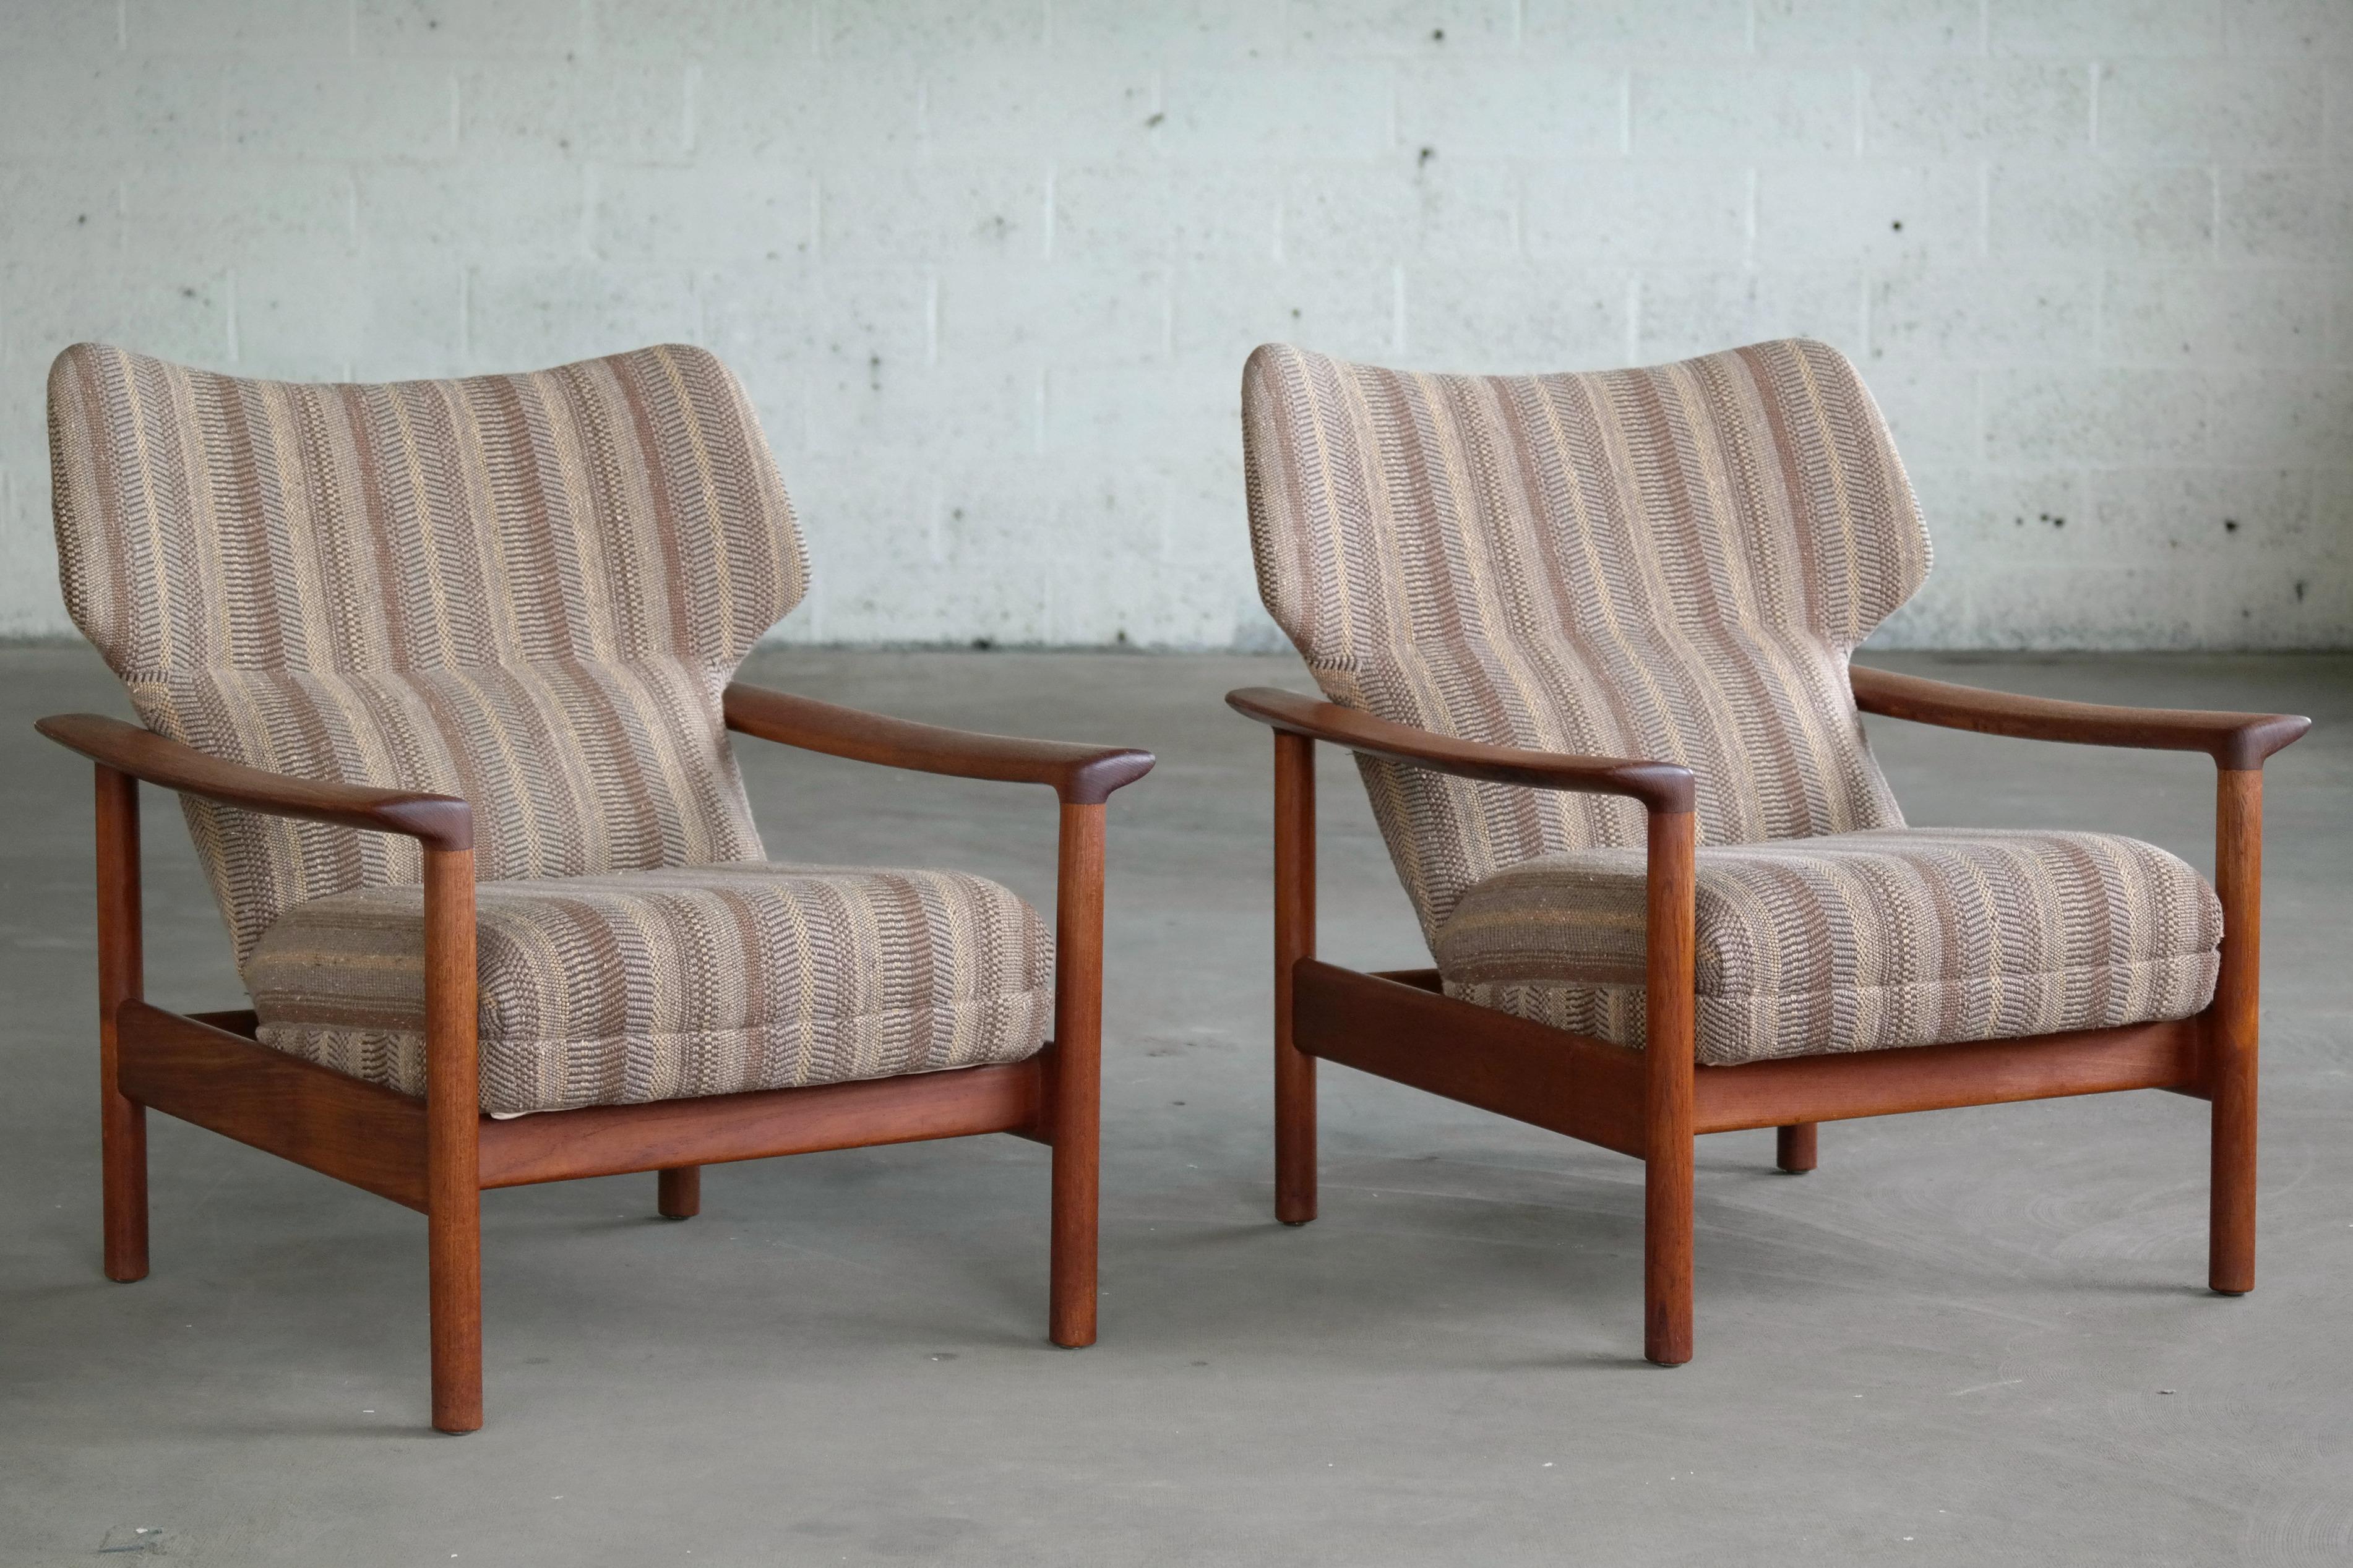 Fantastic pair of very comfortable classic easy chairs in teak and wool. The dimensions of are slightly more generous than the traditional 1950s designs and made from solid teak indicating a production from the early 1970s. They are unmarked but of